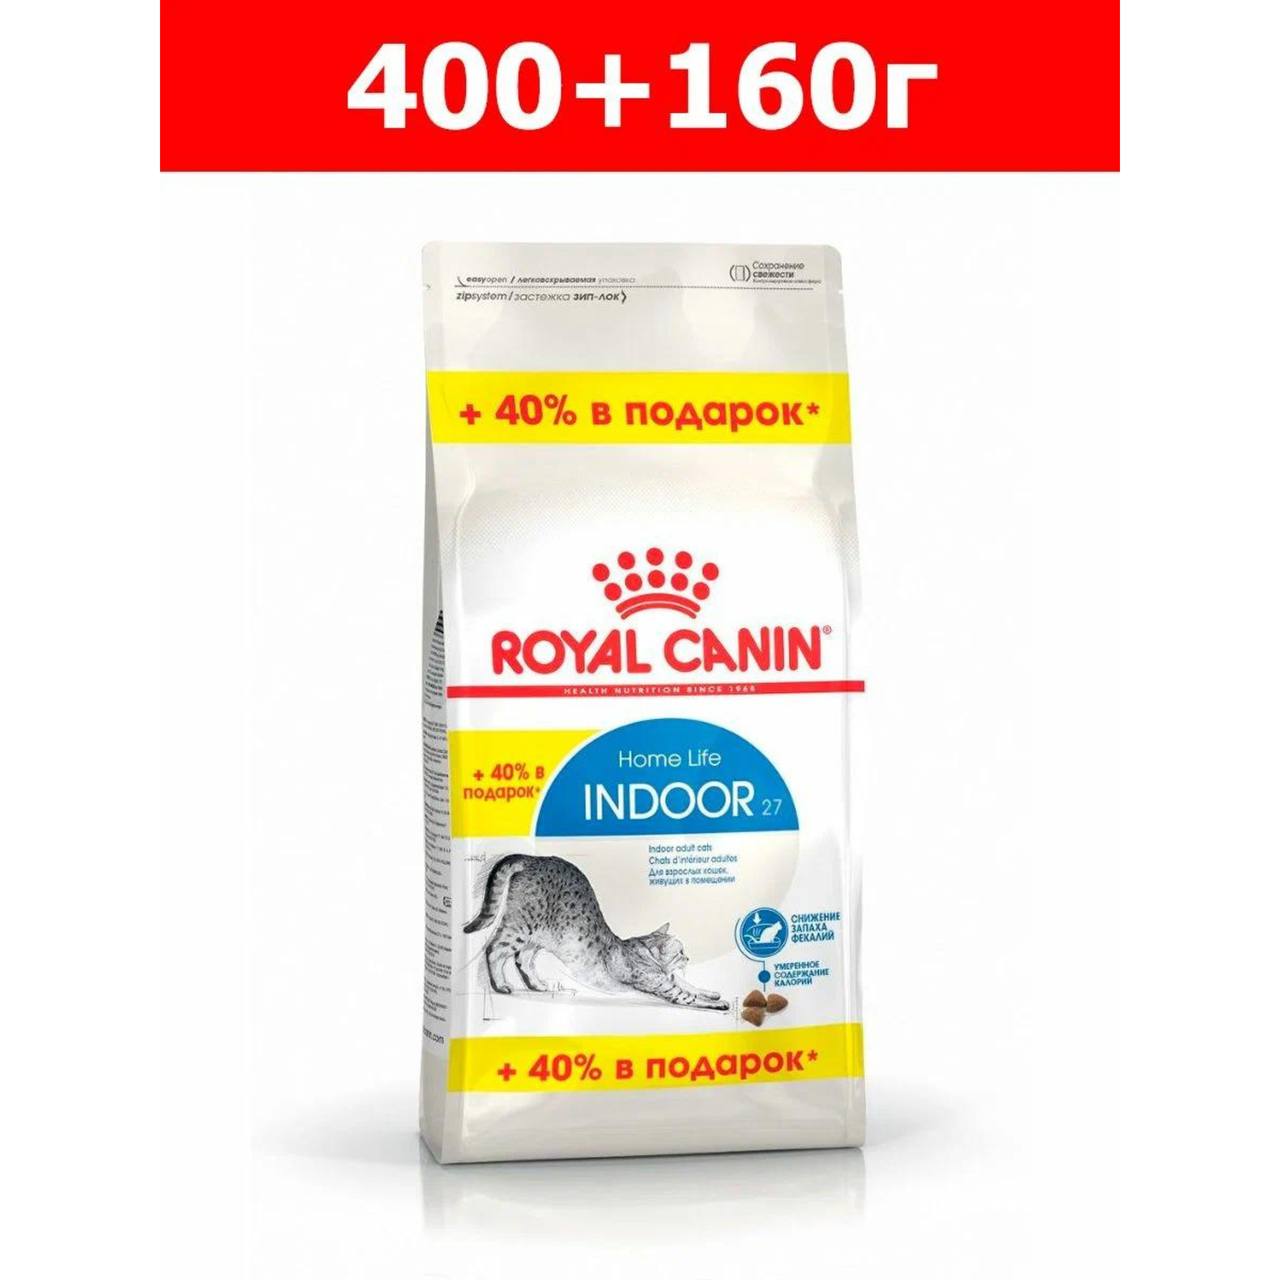 Royal Canin Indoor д/кош 400 г + 160 г